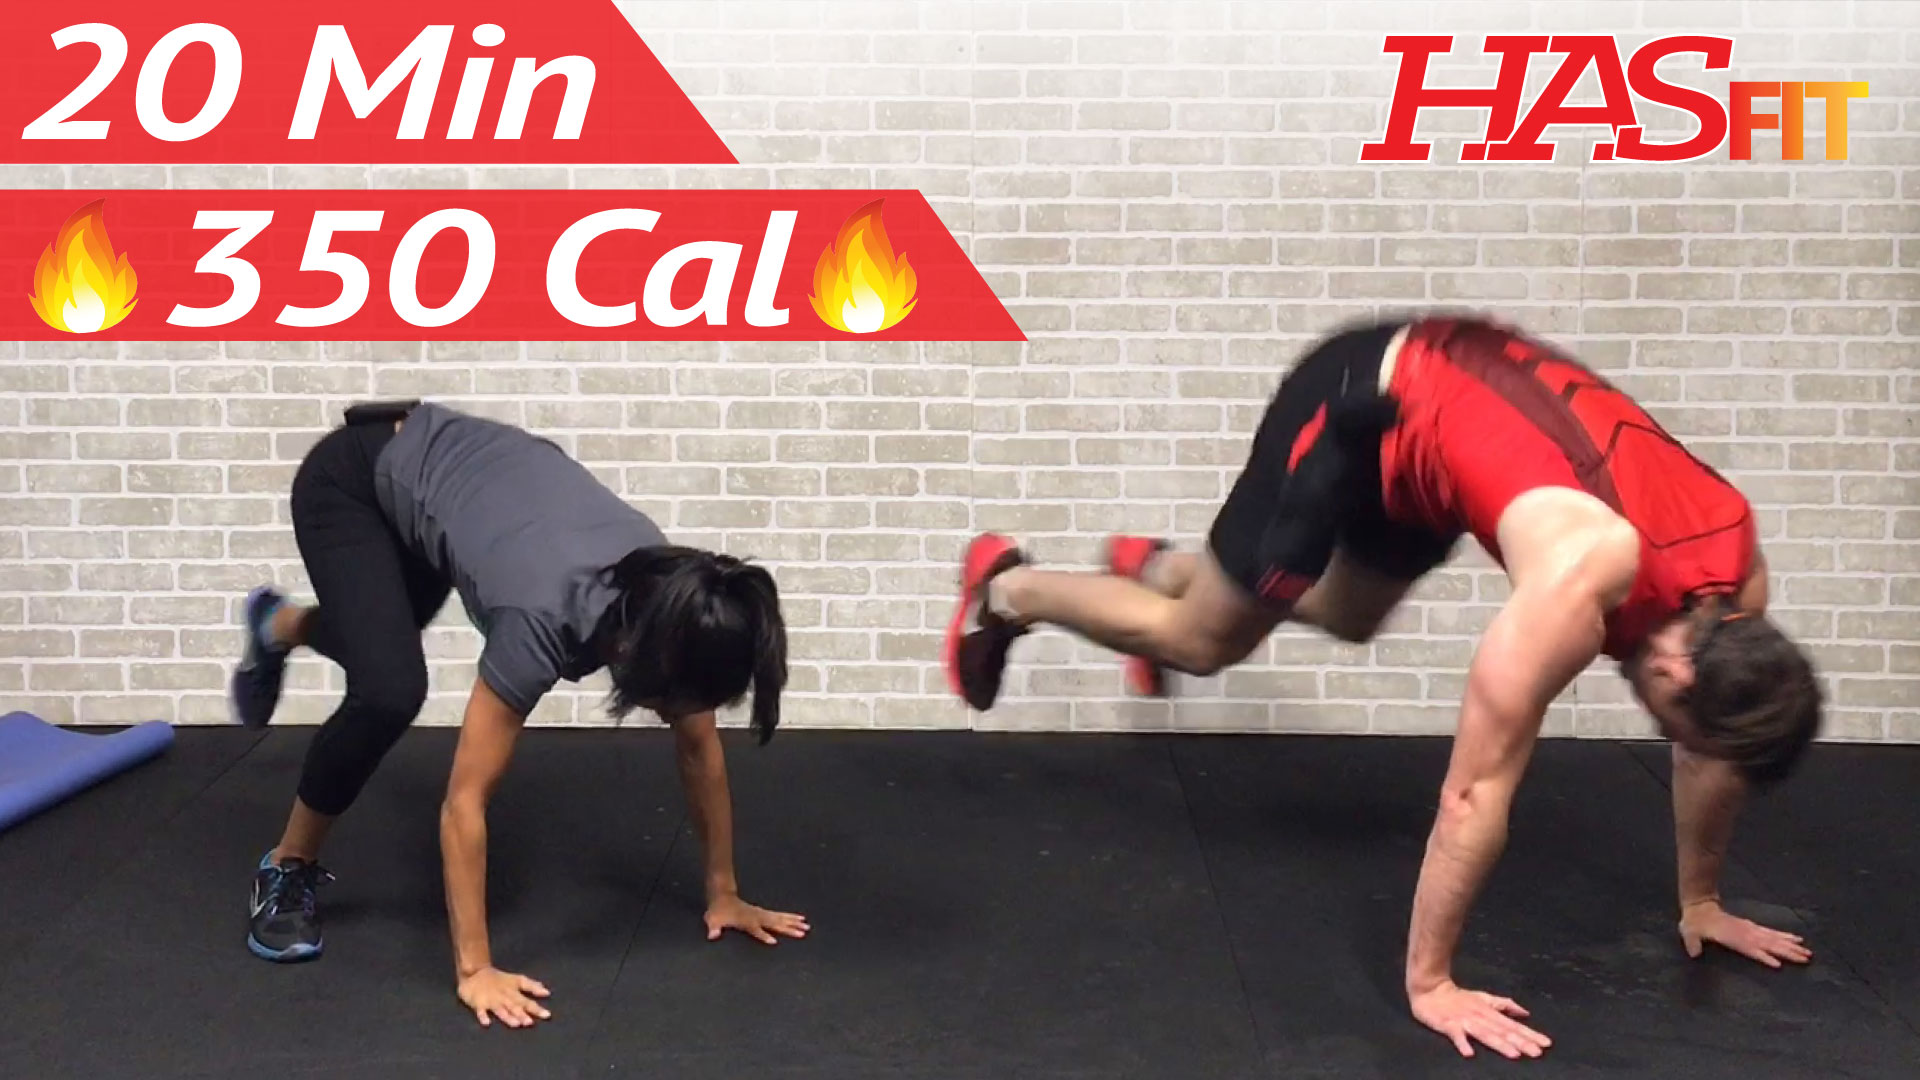 20 Minute HIIT Workout No Equipment - HASfit - Free Full Length Workout ...